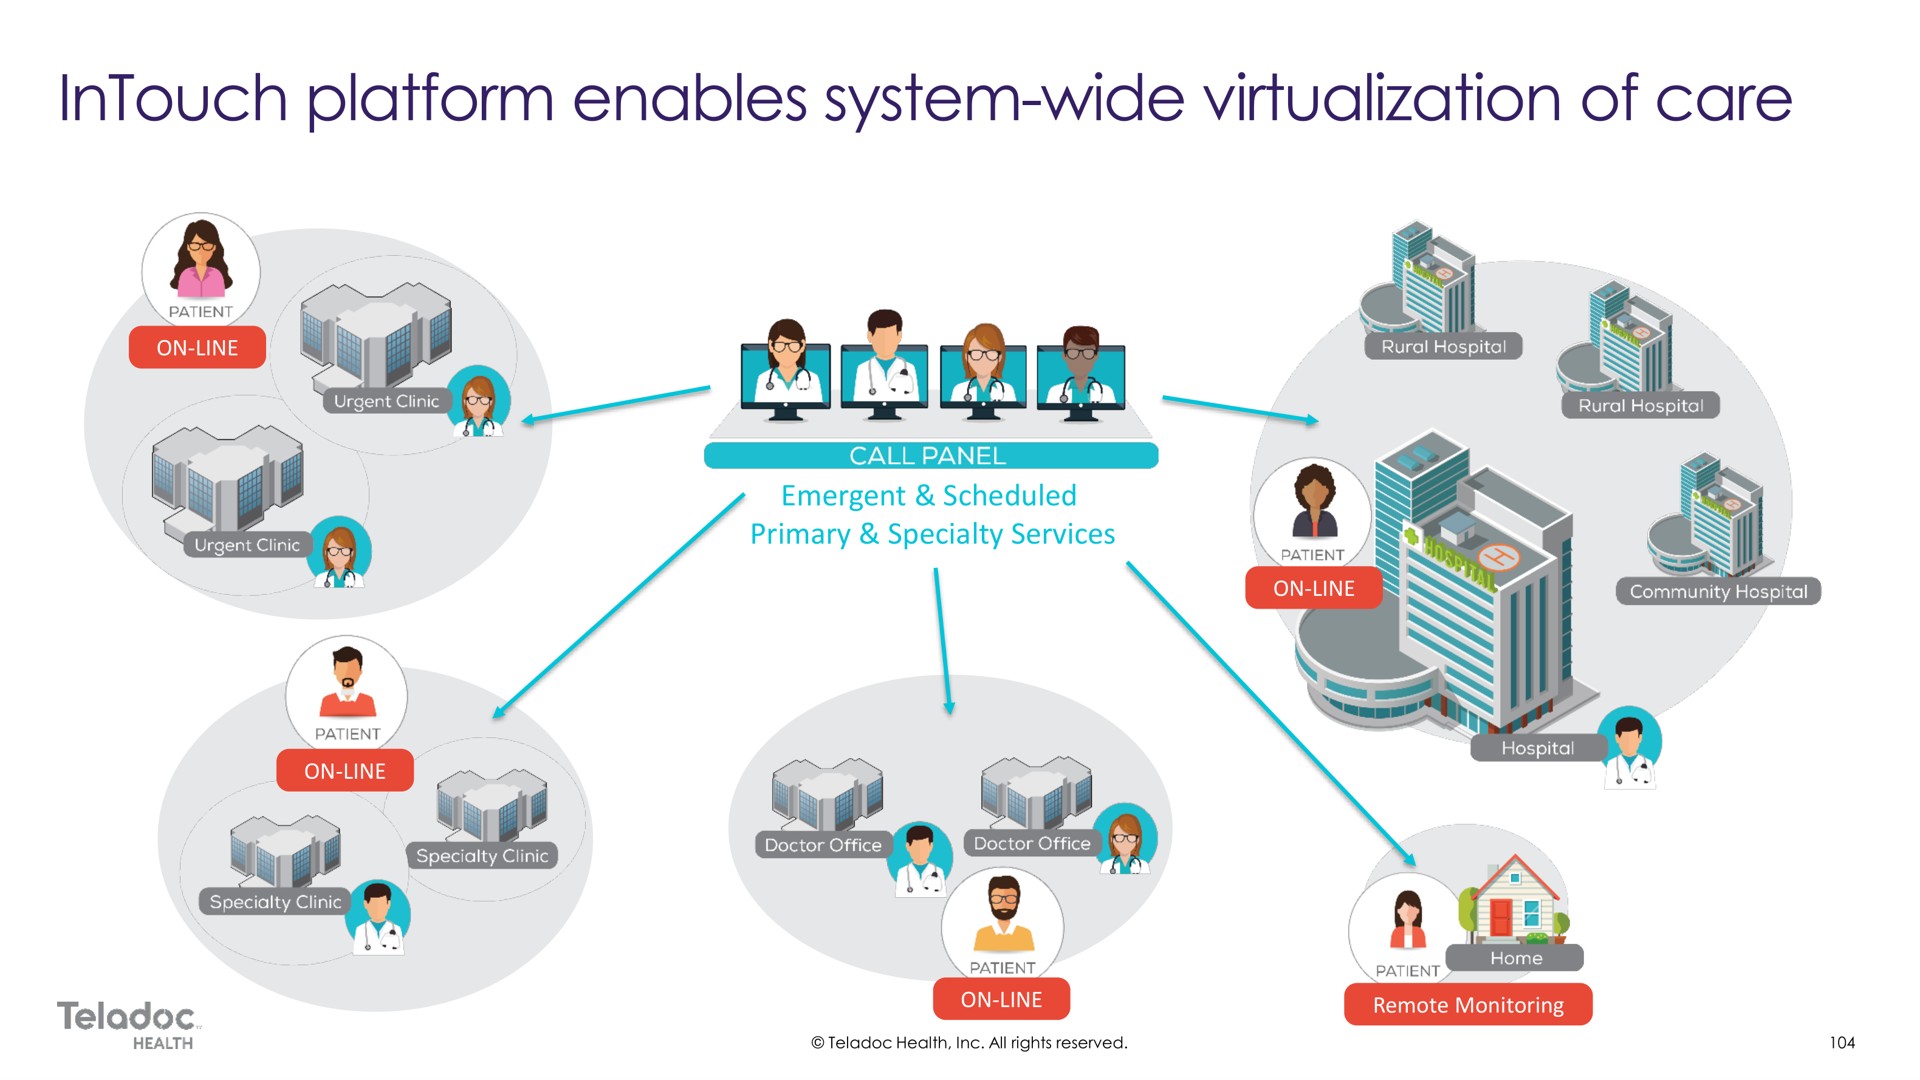 emergent scheduled primary specialty services platform enables system wide of care i | Teladoc